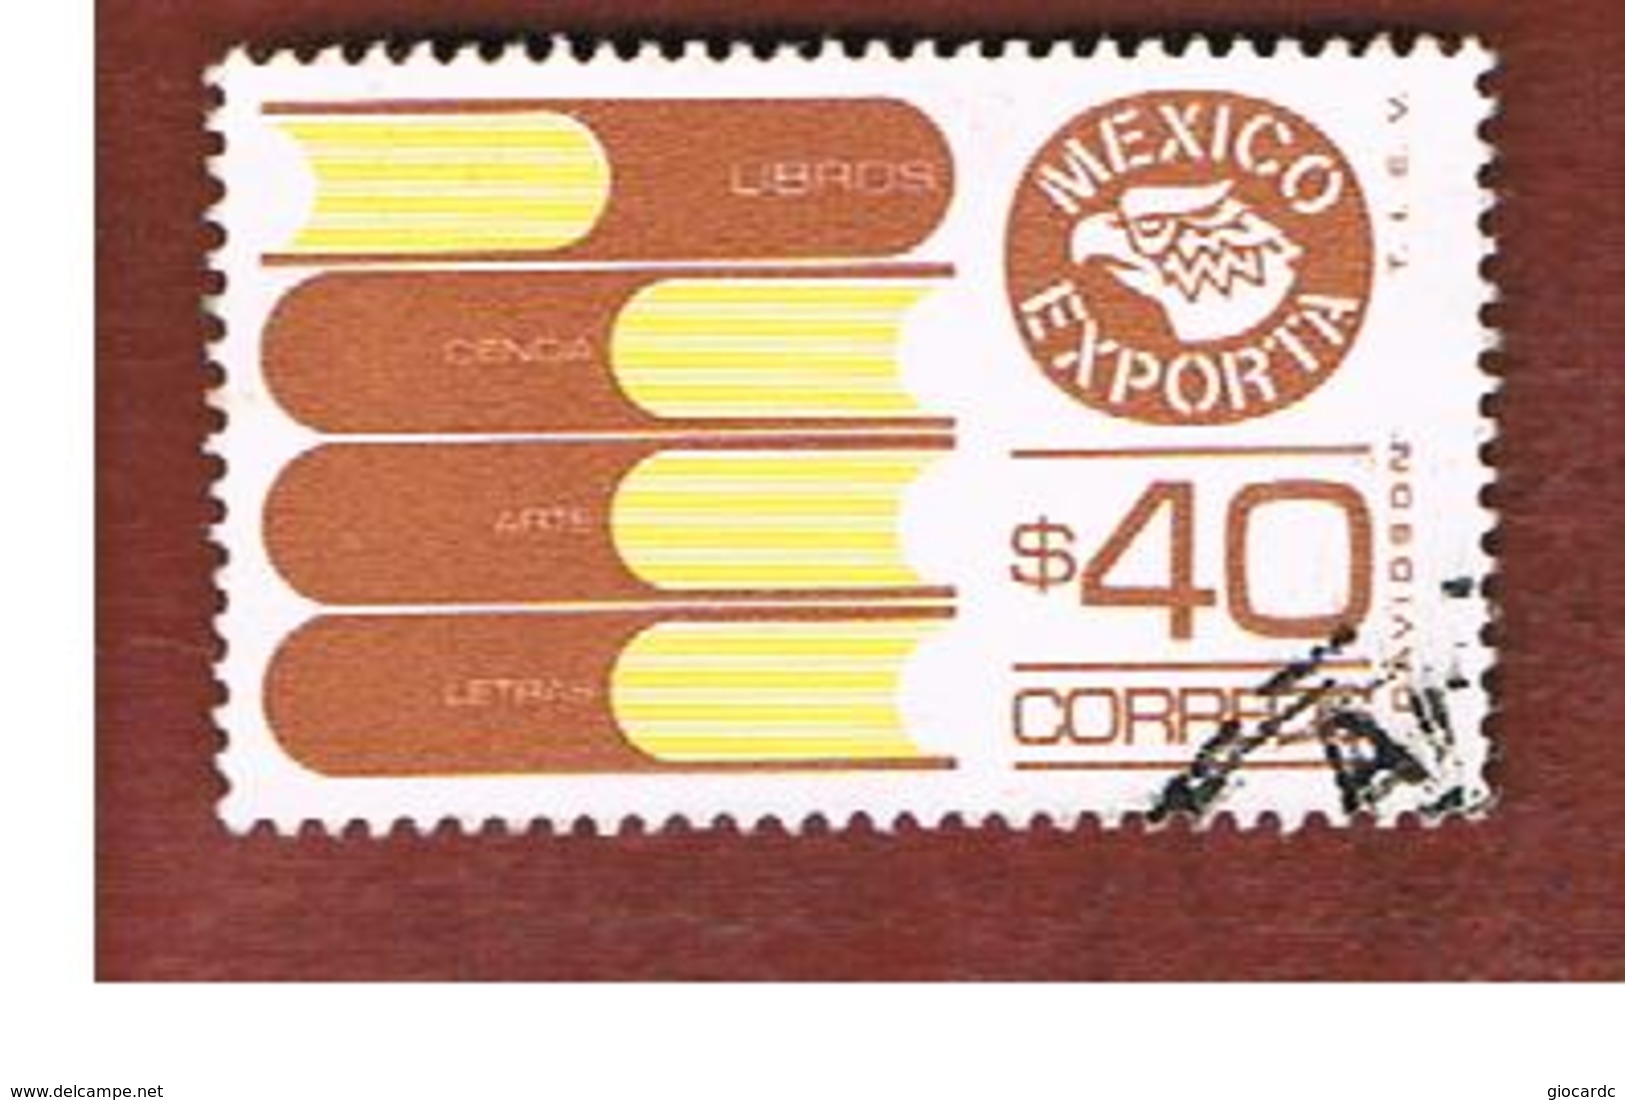 MESSICO (MEXICO) -  SG 1360bk   - 1984    MEXICAN EXPORTS:   BOOKS          -  USED° - Messico